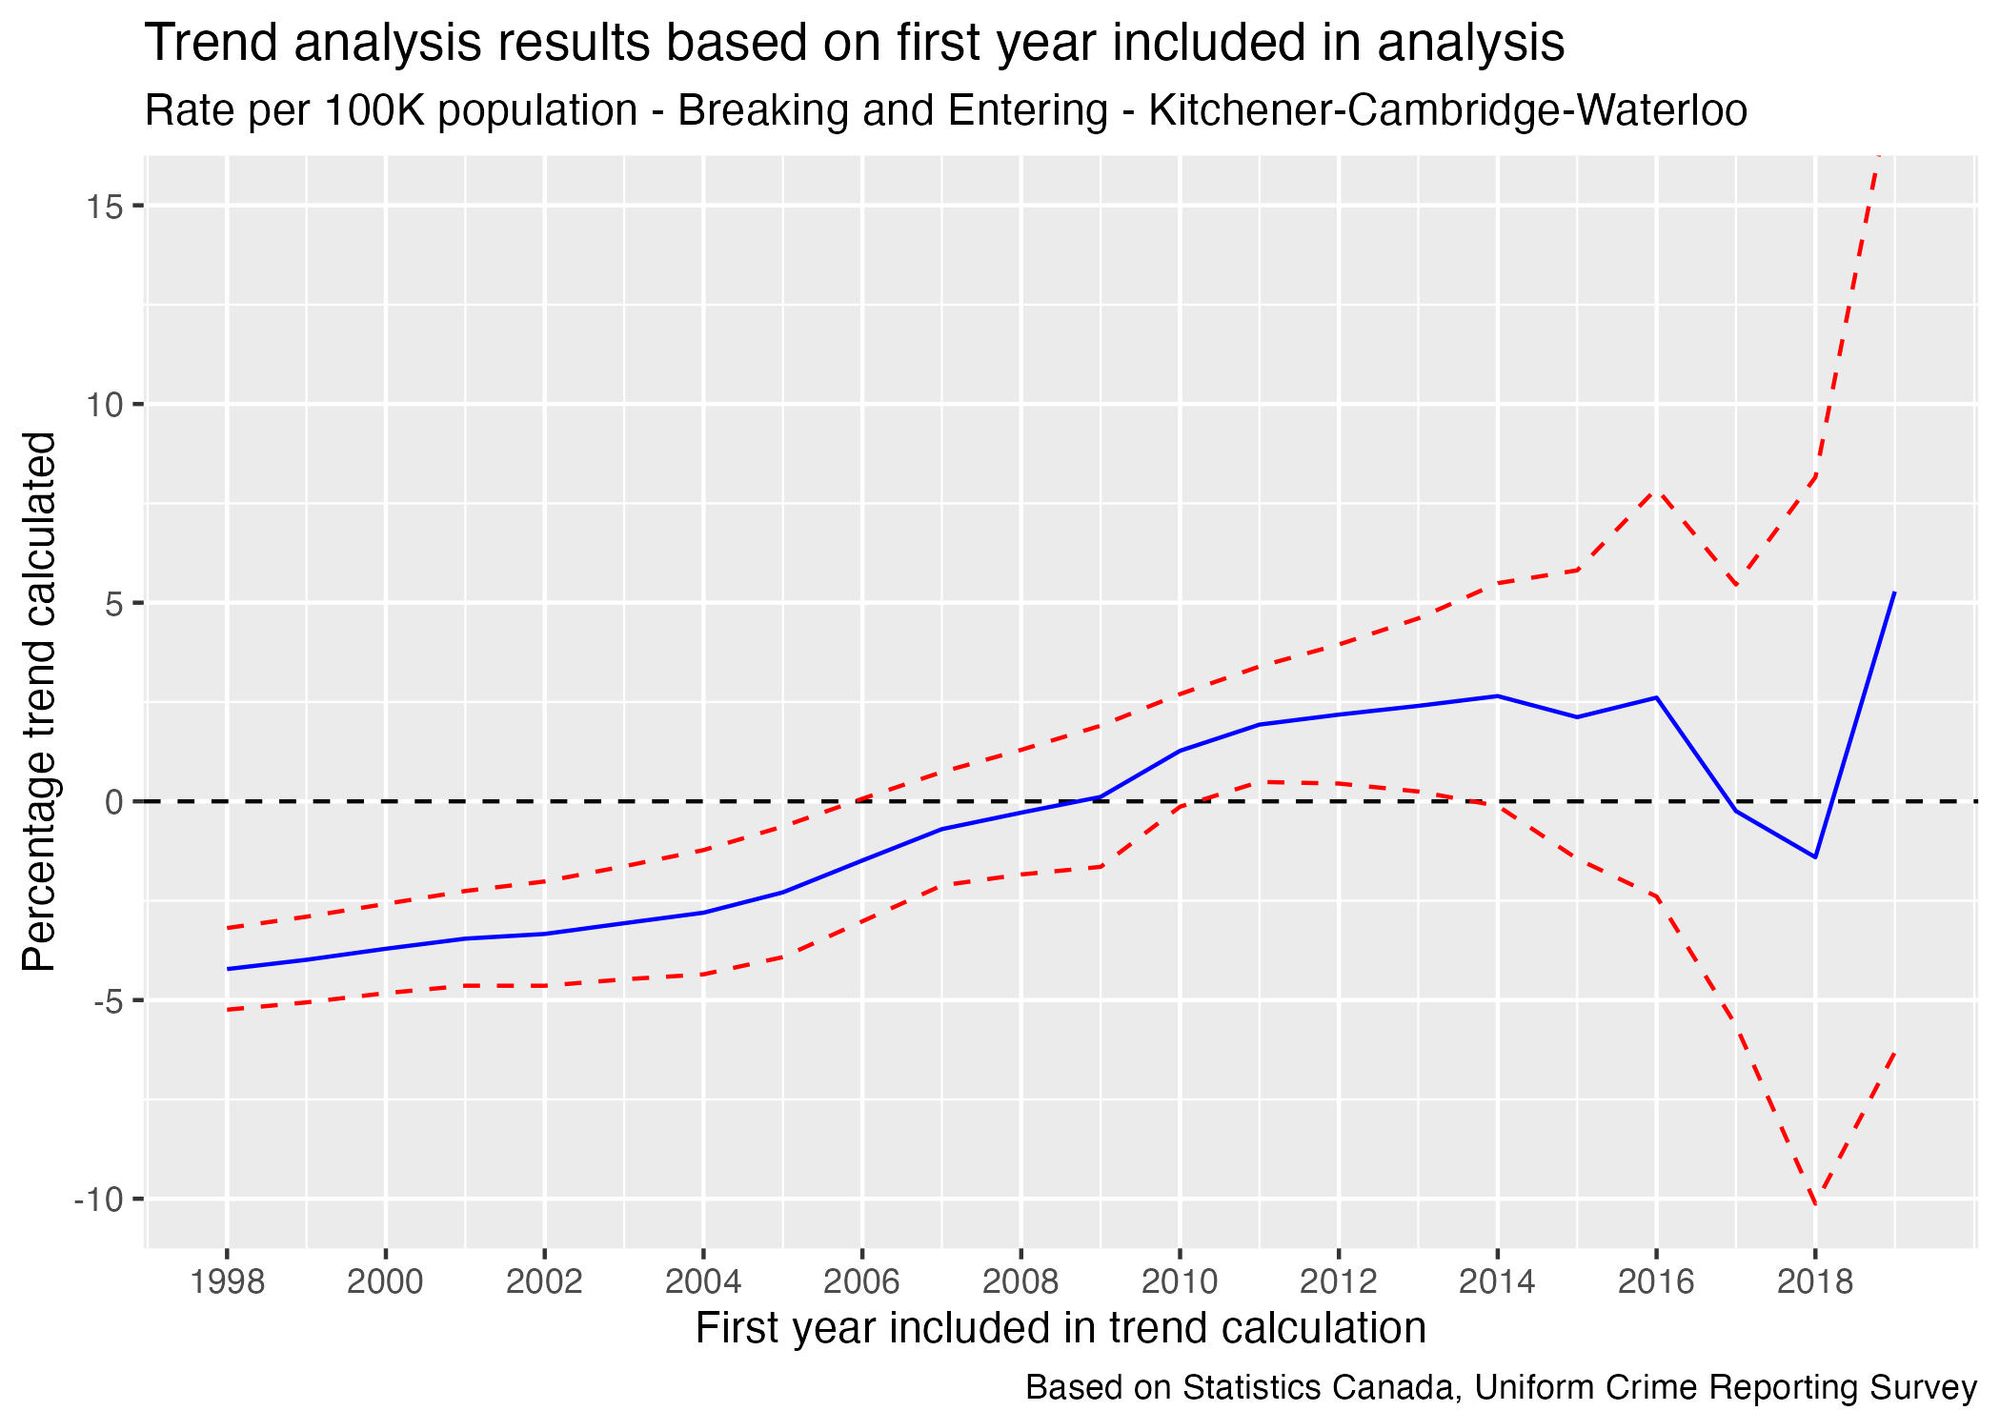 A graph of “Trend analysis results based on first year included in analysis” for “Rate per 100K population—Breaking and Entering—Kitchener-Cambridge-Waterloo. It shows the “Percentage trend calculated” for each year between 1998 and 2019, inclusive. A solid blue line is surrounded by two dashed red lines. The blue line starts off below zero, slowly increases to a value of 2.5% around 2012, and by 2017 is near zero. Further description is provided in the main article.